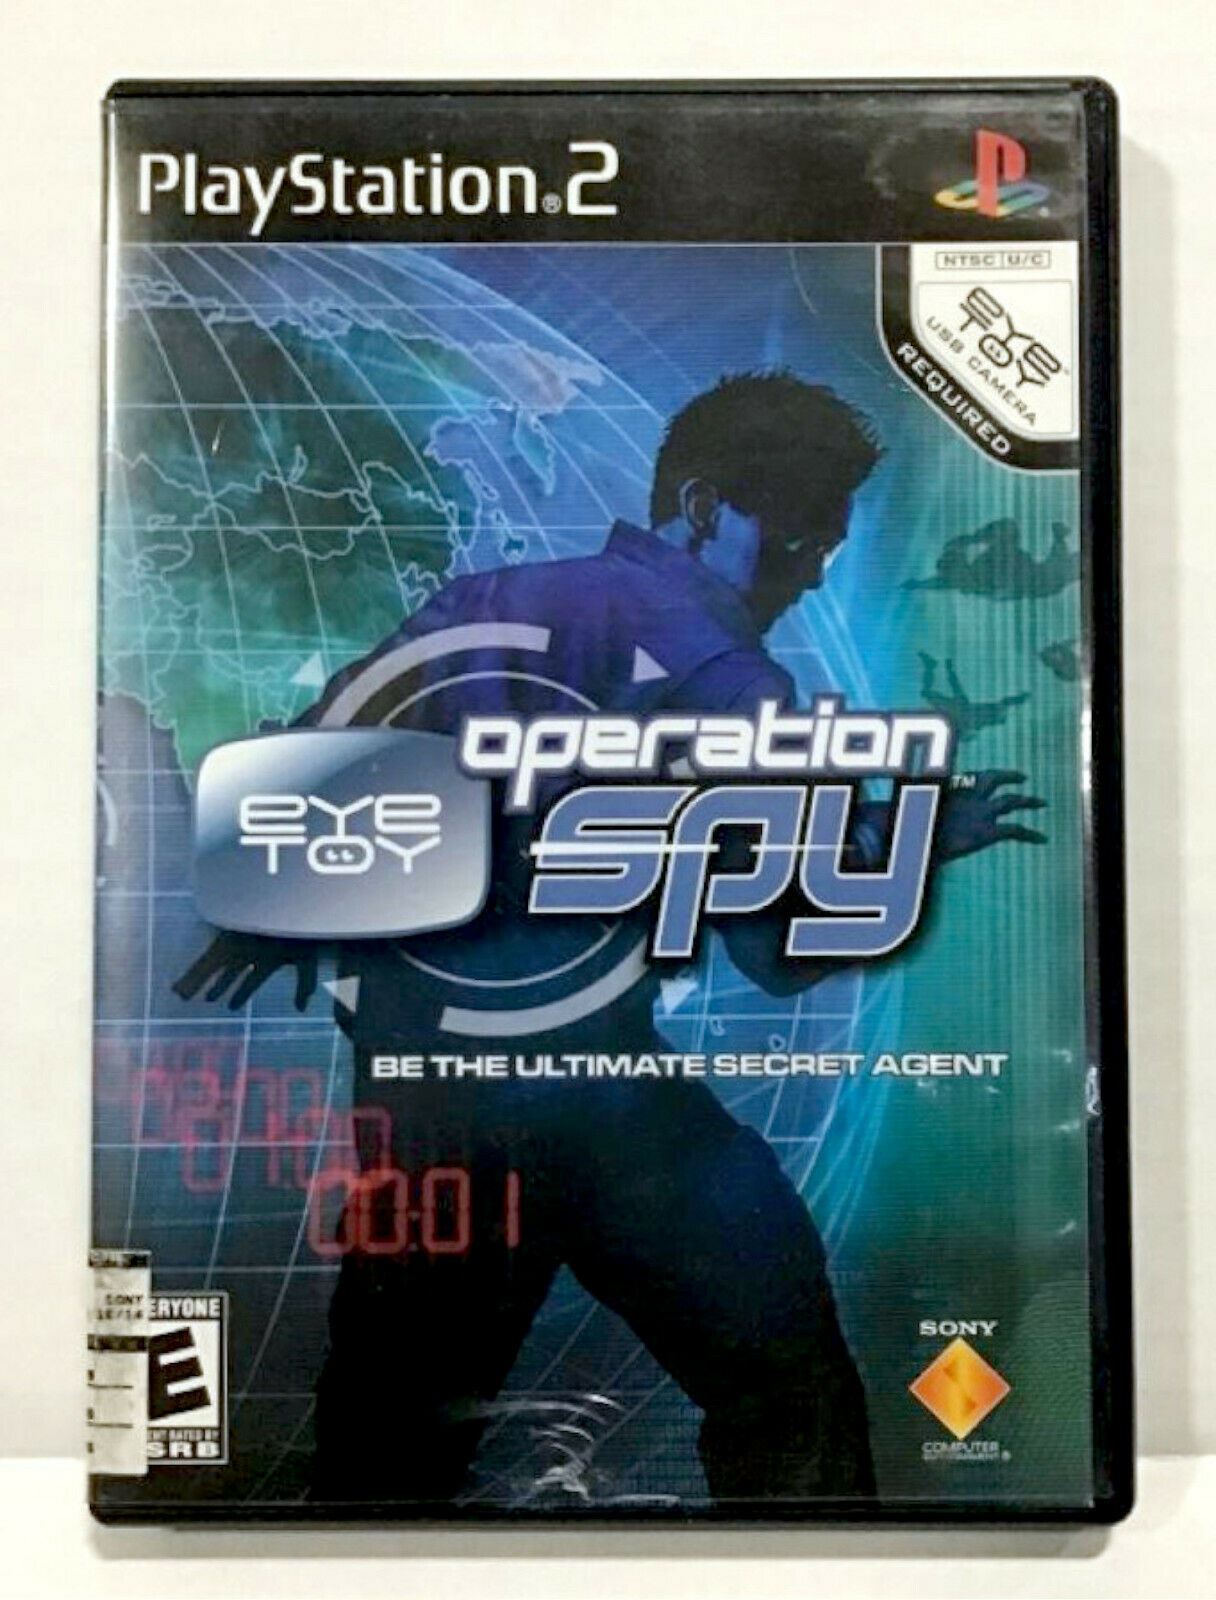 Operation Spy Sony PlayStation 2 Video Game PS2 EyeToy Camera Required puzzle [Used/Refurbished]